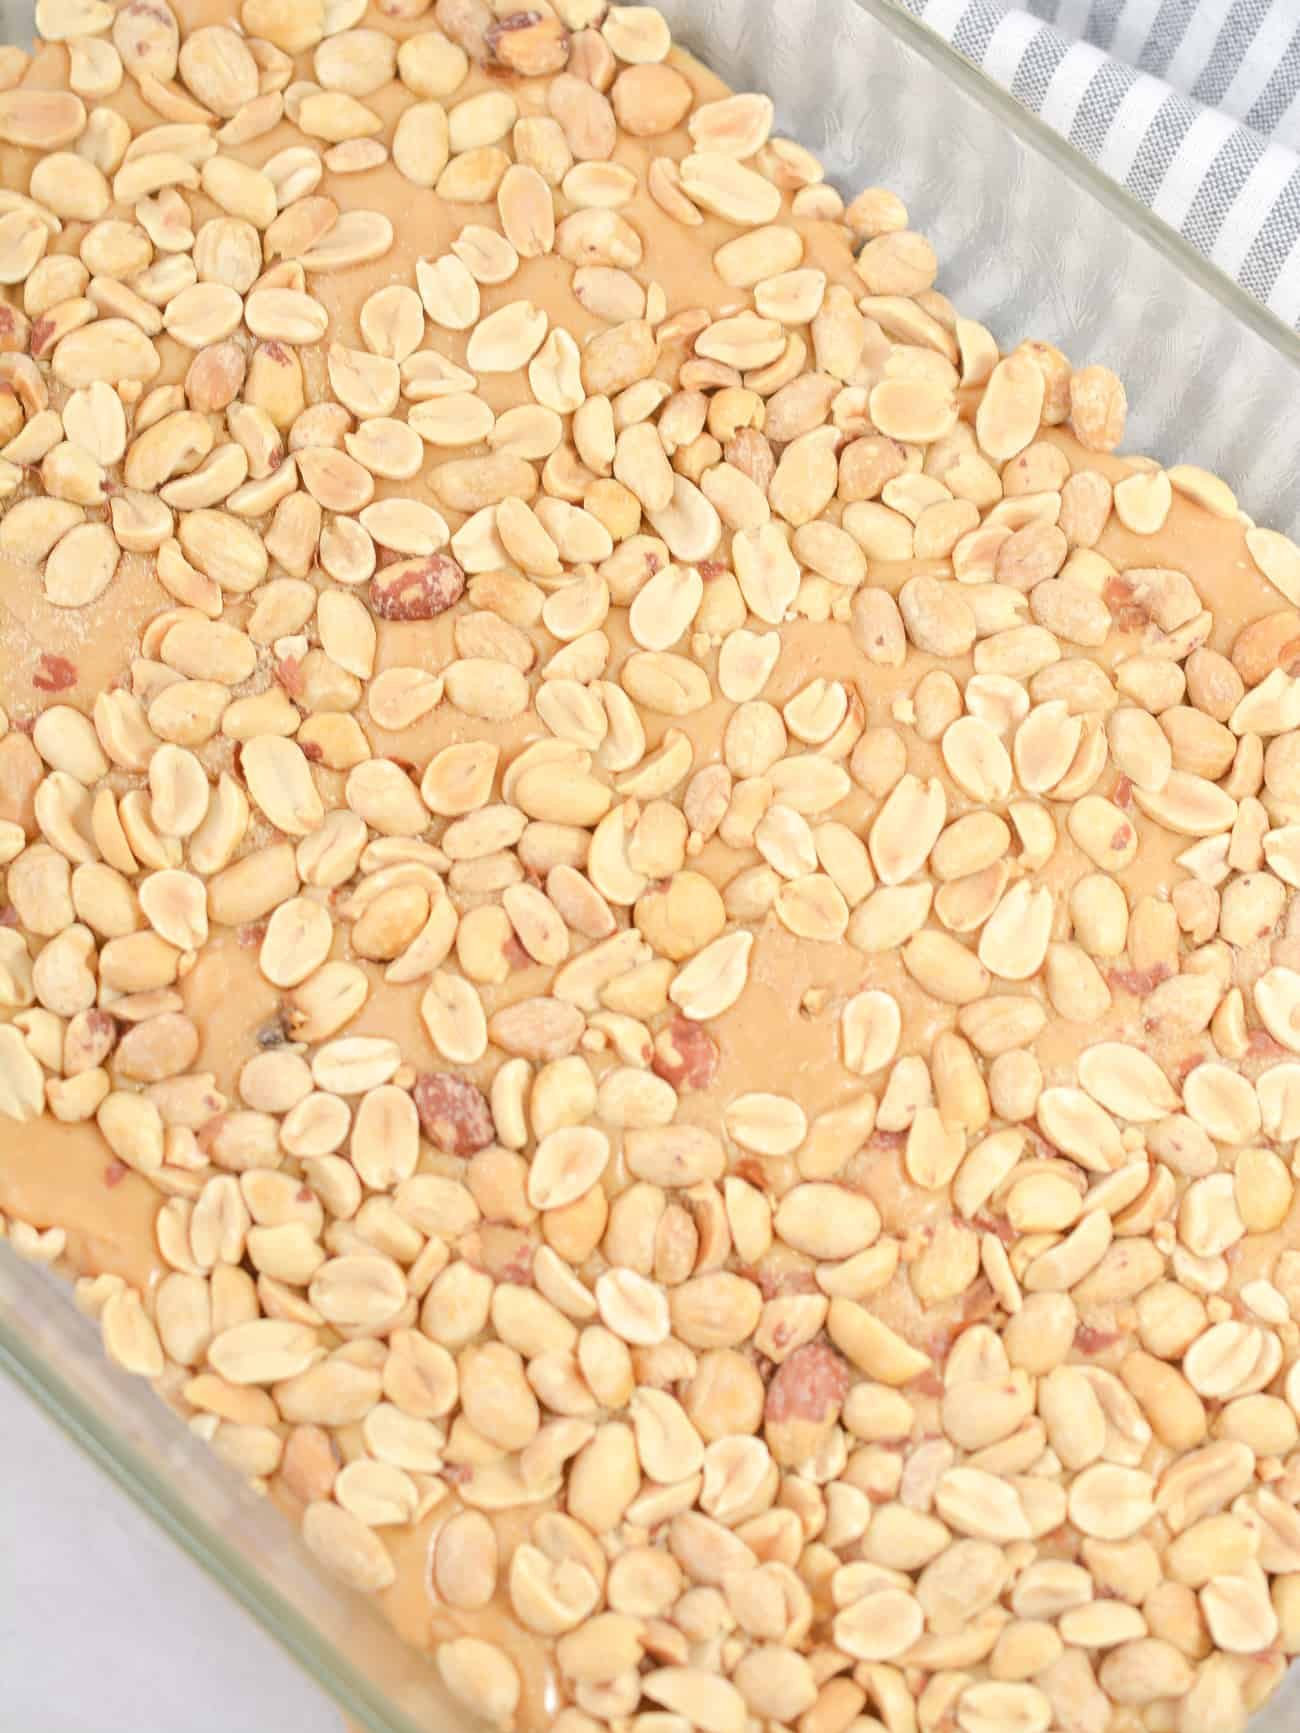 Top the mixture with the rest of the peanuts.